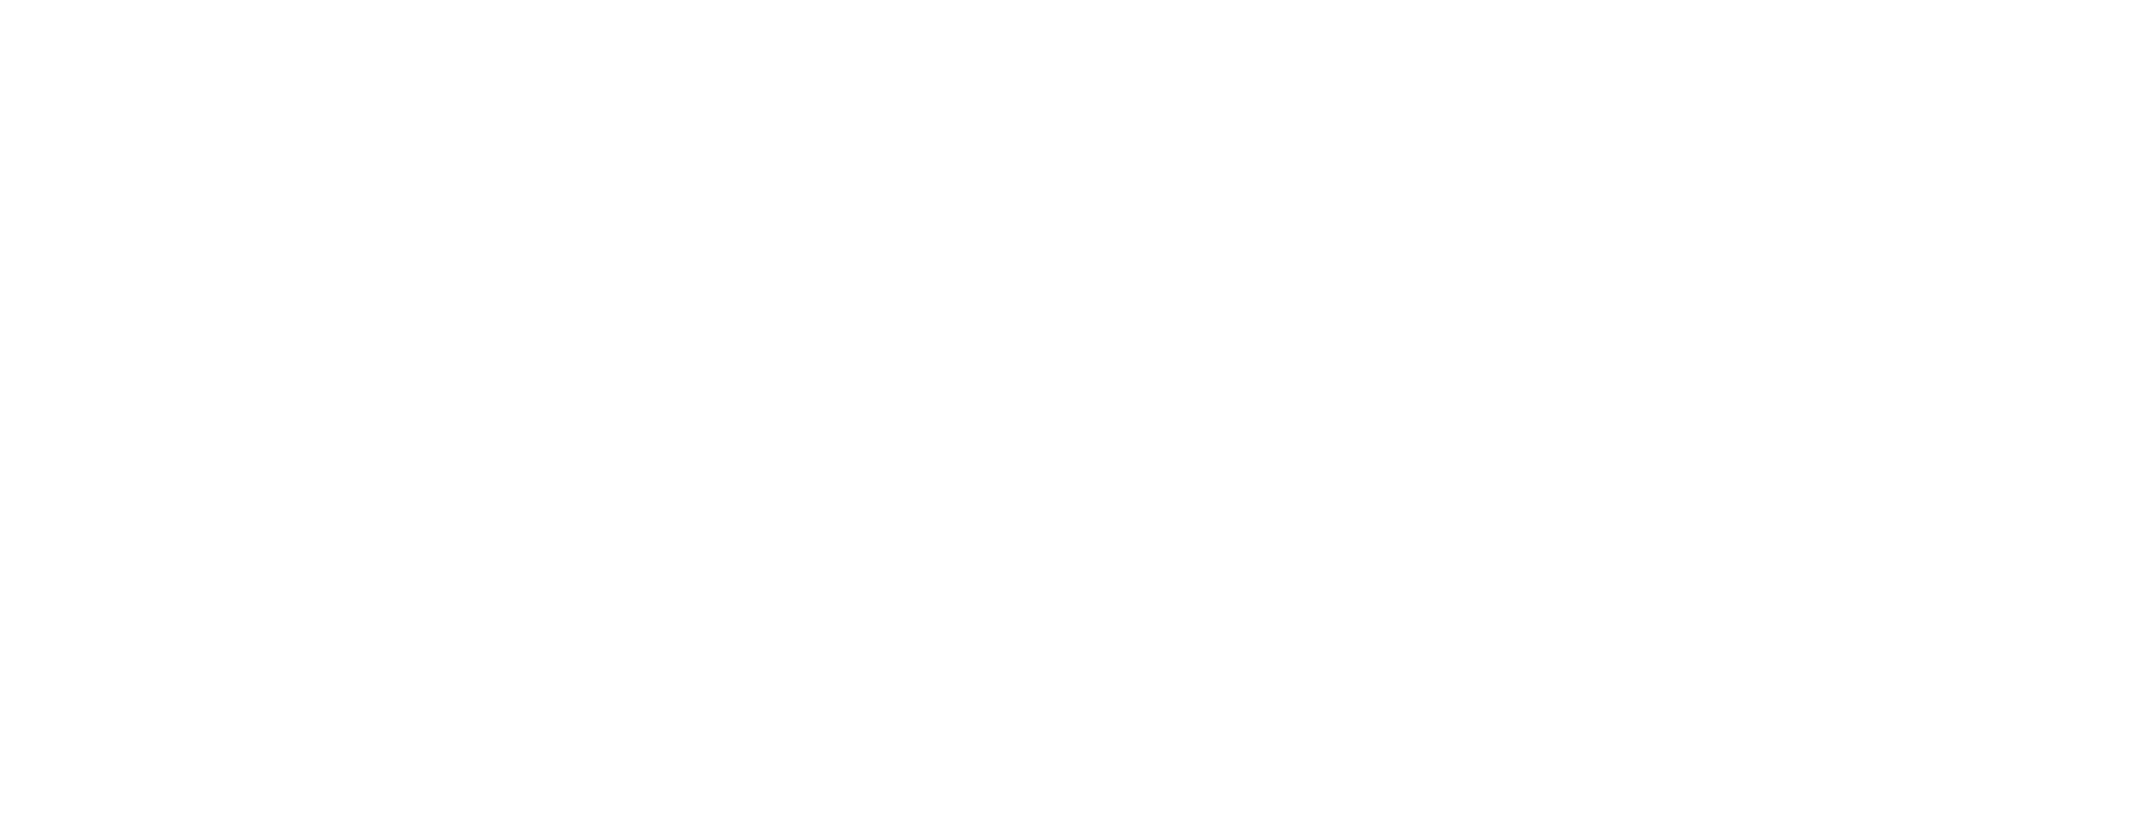 READYFOR OF THE YEAR 2015 夢へのスタートアップ大賞 時事通信ホール 2015.11.25